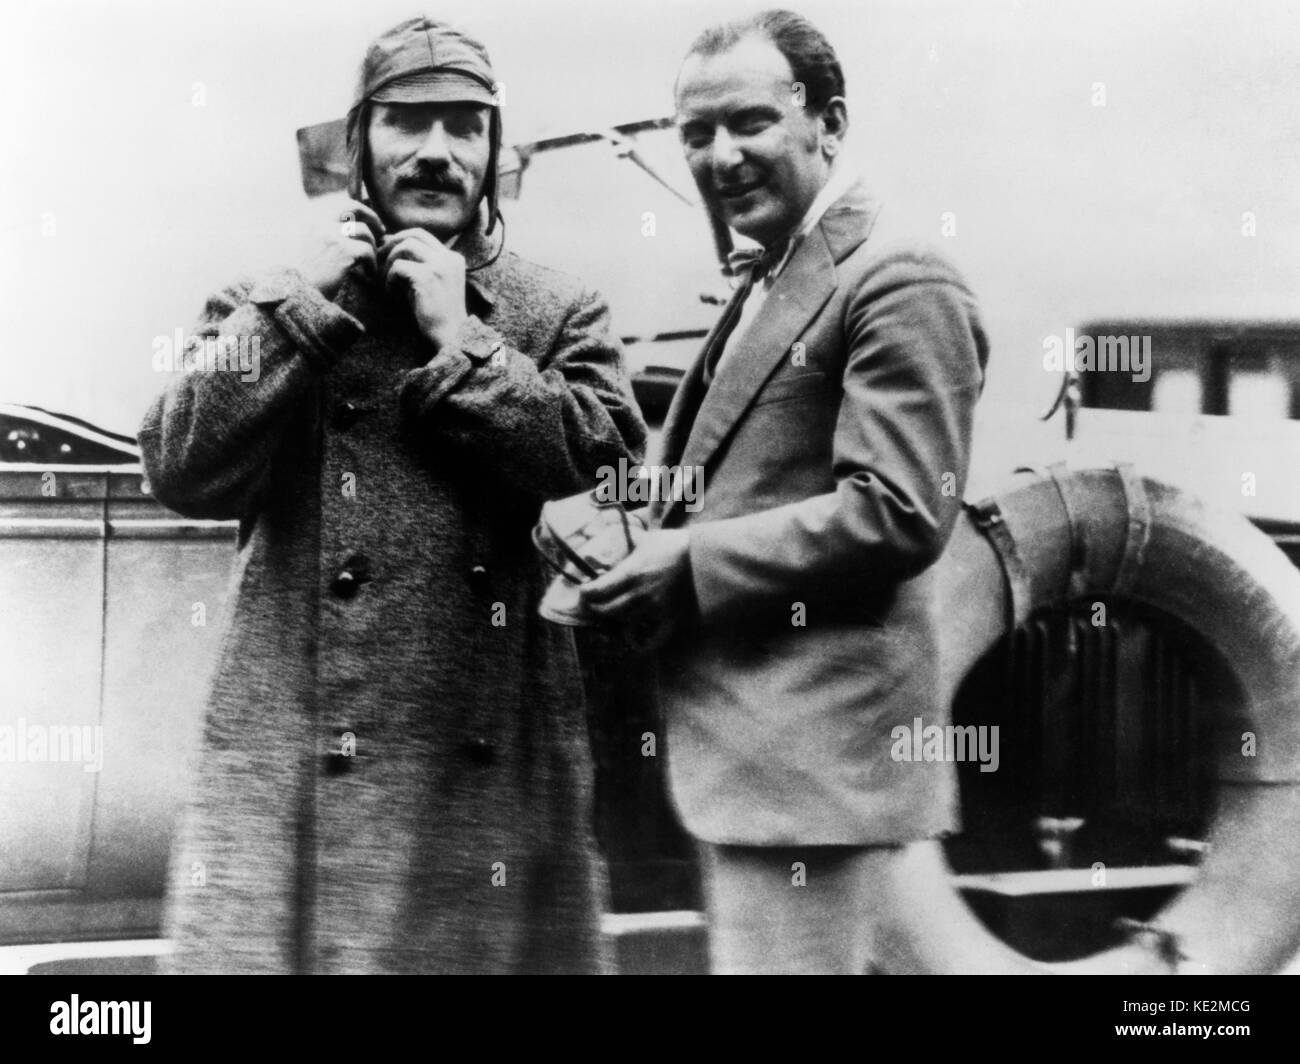 Arturo Toscanini , Italian conductor, and Fritz Reiner , Hungarian born American conductor getting ready to travel.  1930s AT: 25 March 1867 - 16 January 1957.  FR: 19 December 1888 - 15 November 1963. Stock Photo